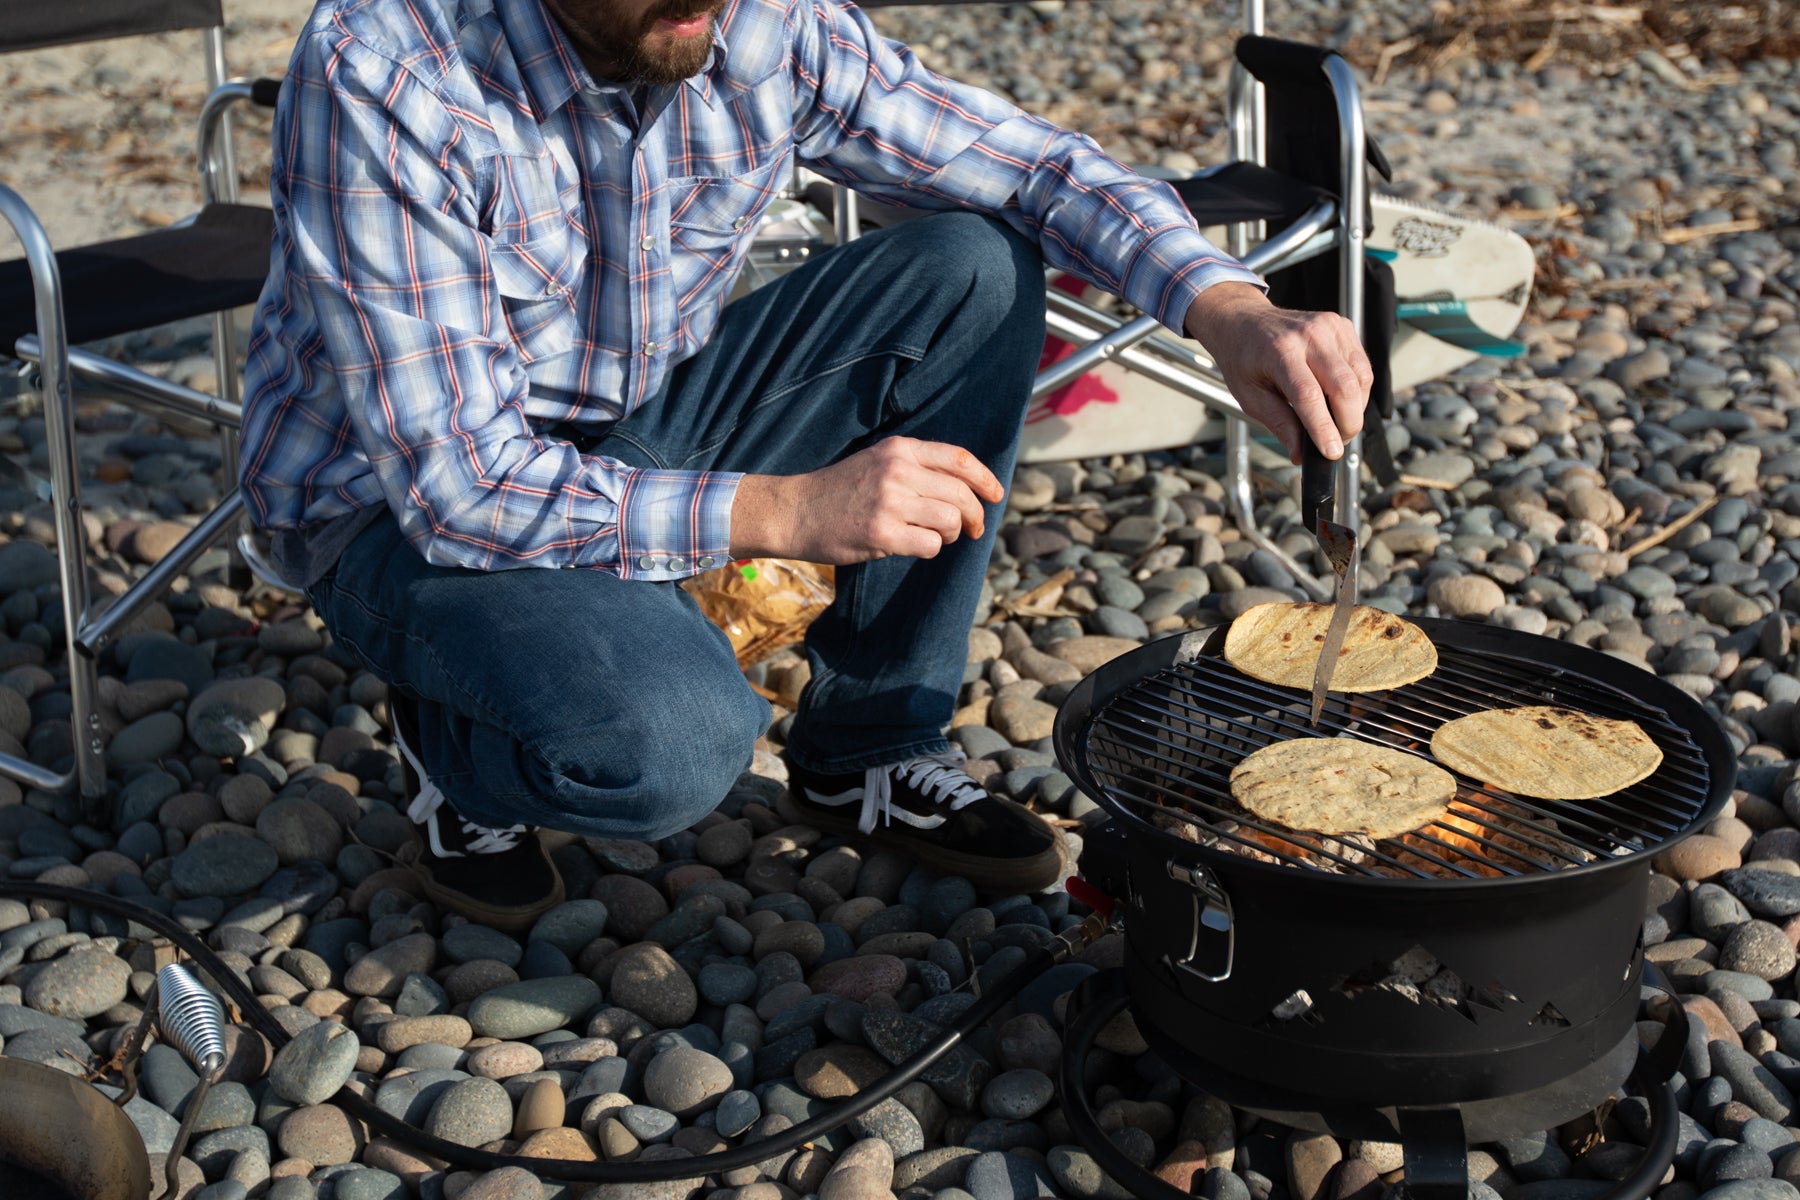 man making tacos heating up tortillas on portable grill at cobblestone beach